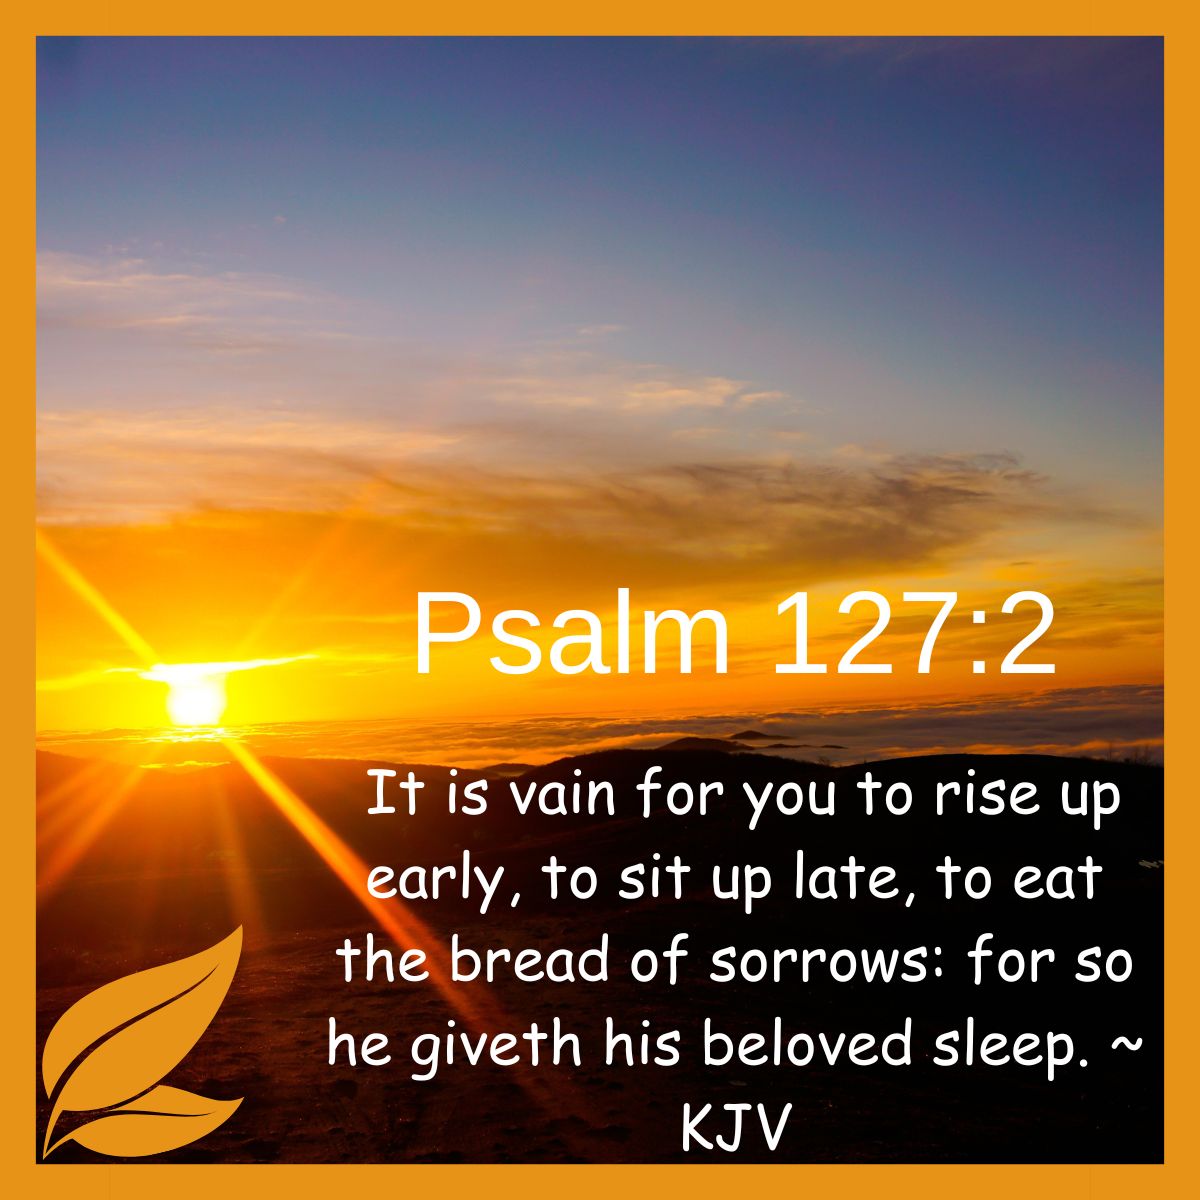 It is vain for you to rise up early, to sit up late, to eat the bread of sorrows: for so he giveth his beloved sleep. Psalm 127.2